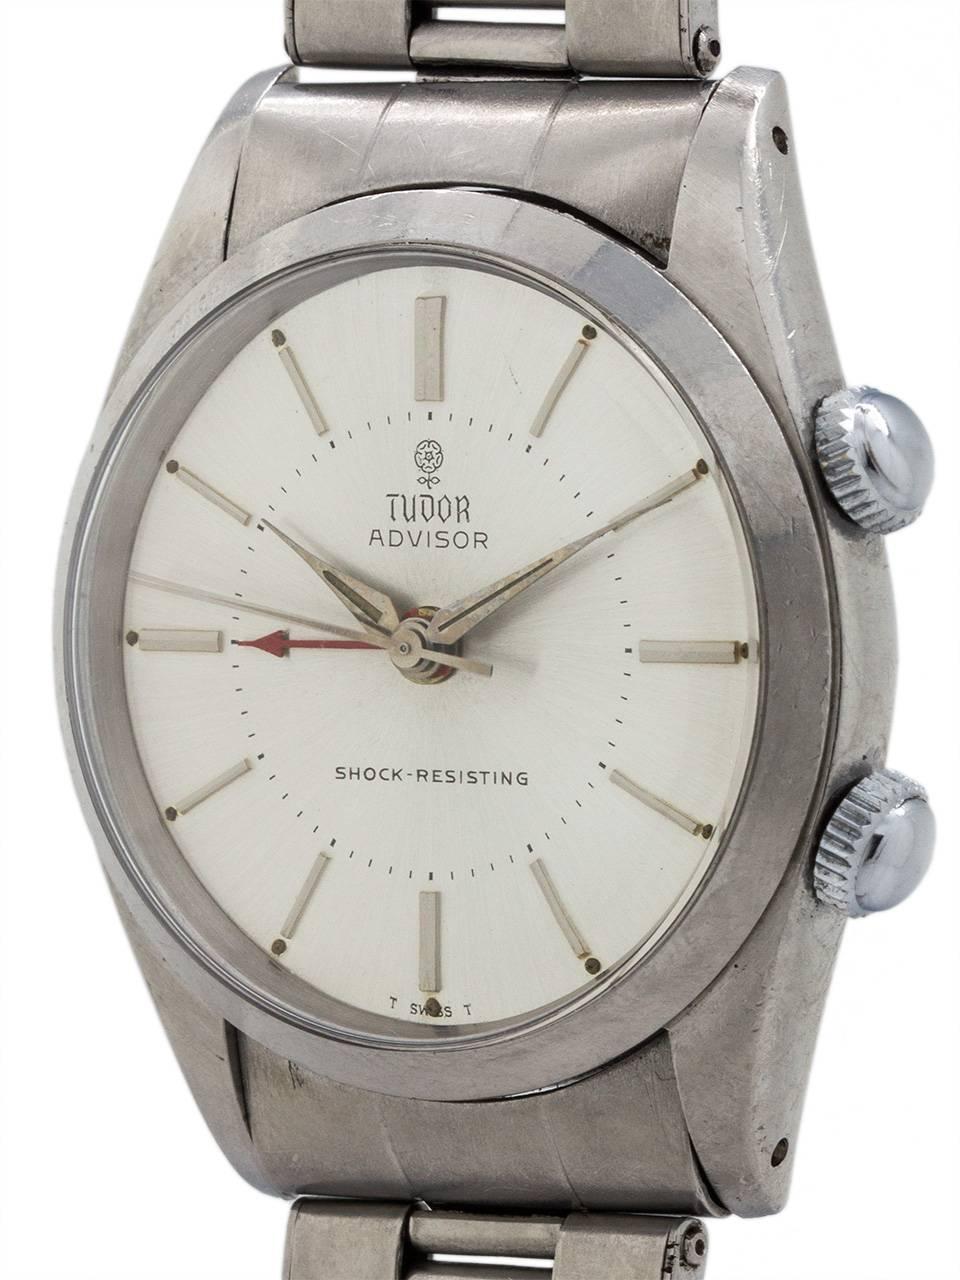 Tudor Advisor alarm model  ref 7926 featuring a 34 x 41mm stainless steel screw back case serial # 508,xxx circa 1966 with silver satin original dial signed Tudor Advisor Shock-Resisting T SWISS T, with applied silvered indexes with patina’d